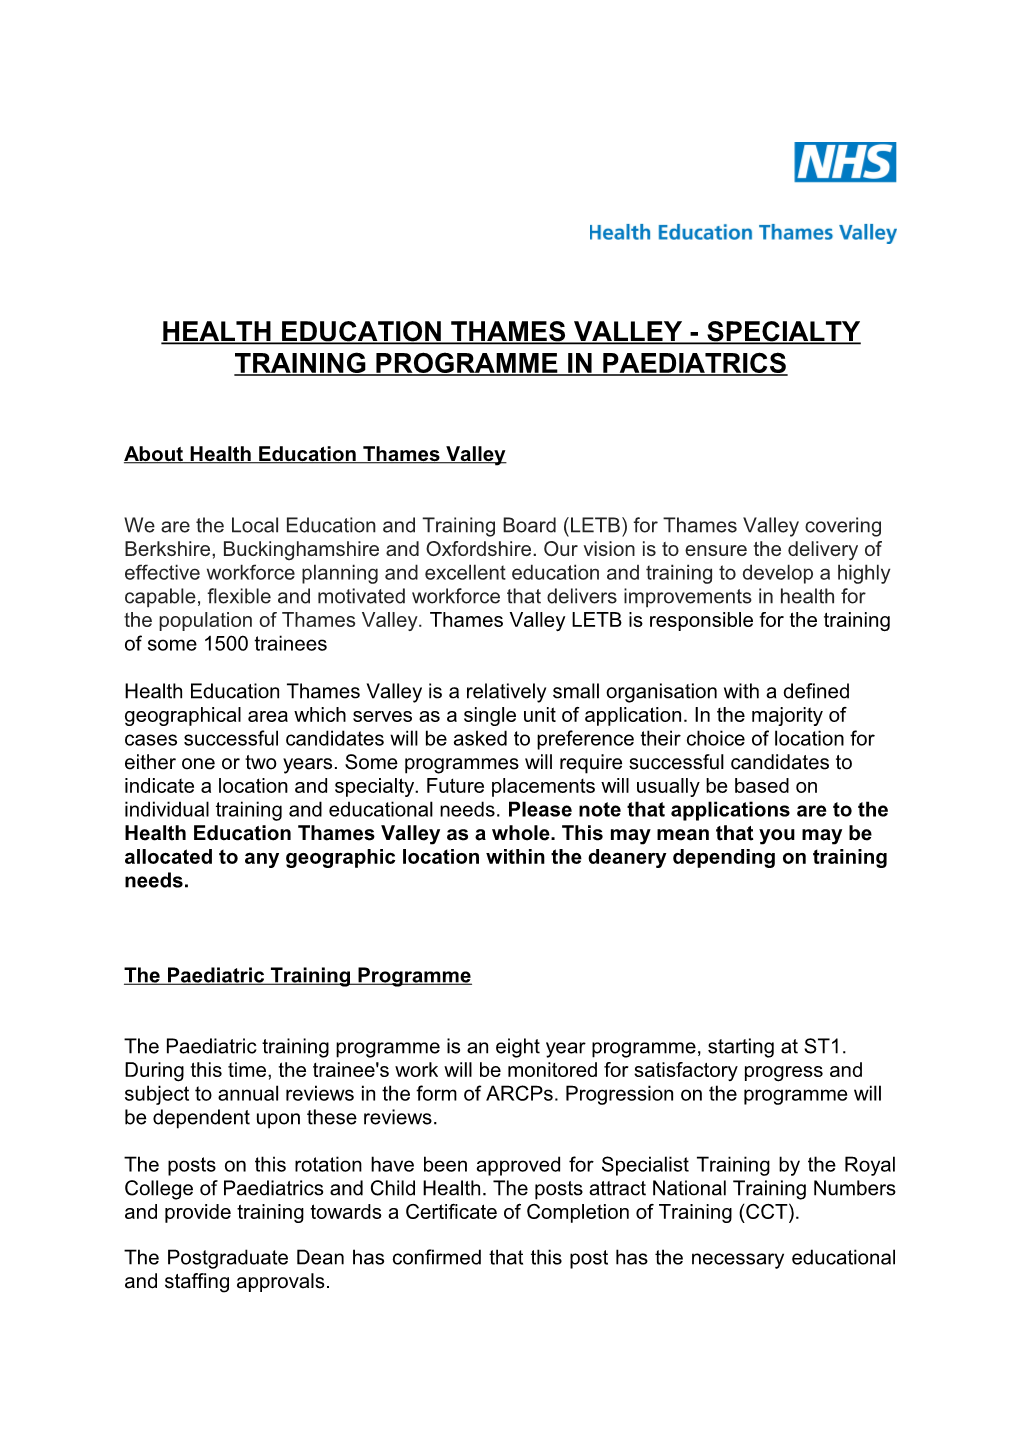 Oxford Deanery Specialty Training Programme in Paediatrics